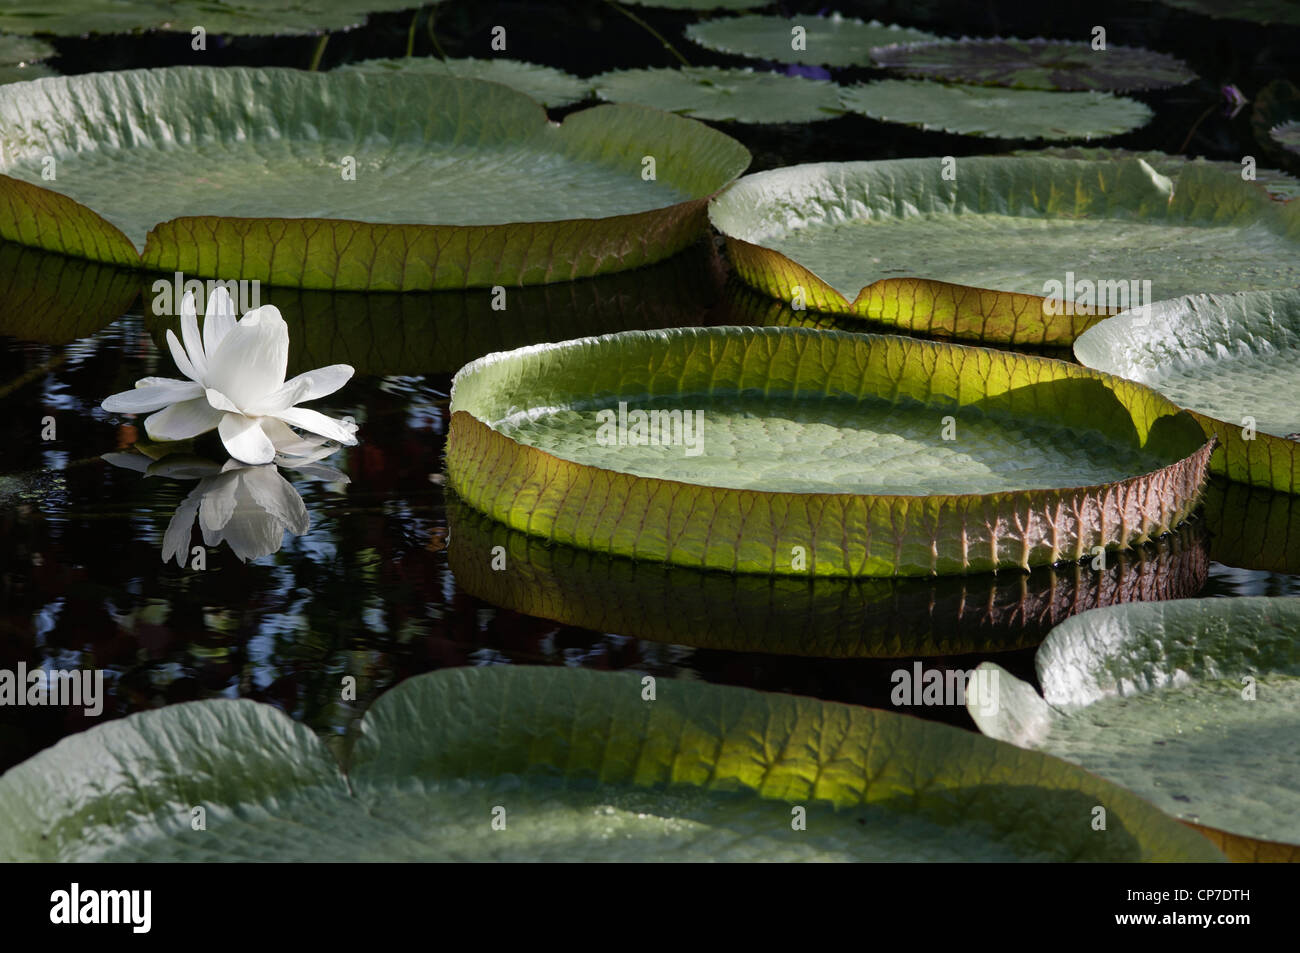 Victoria cruziana, Giant water lily, White flower floating on water among lily pads. Stock Photo